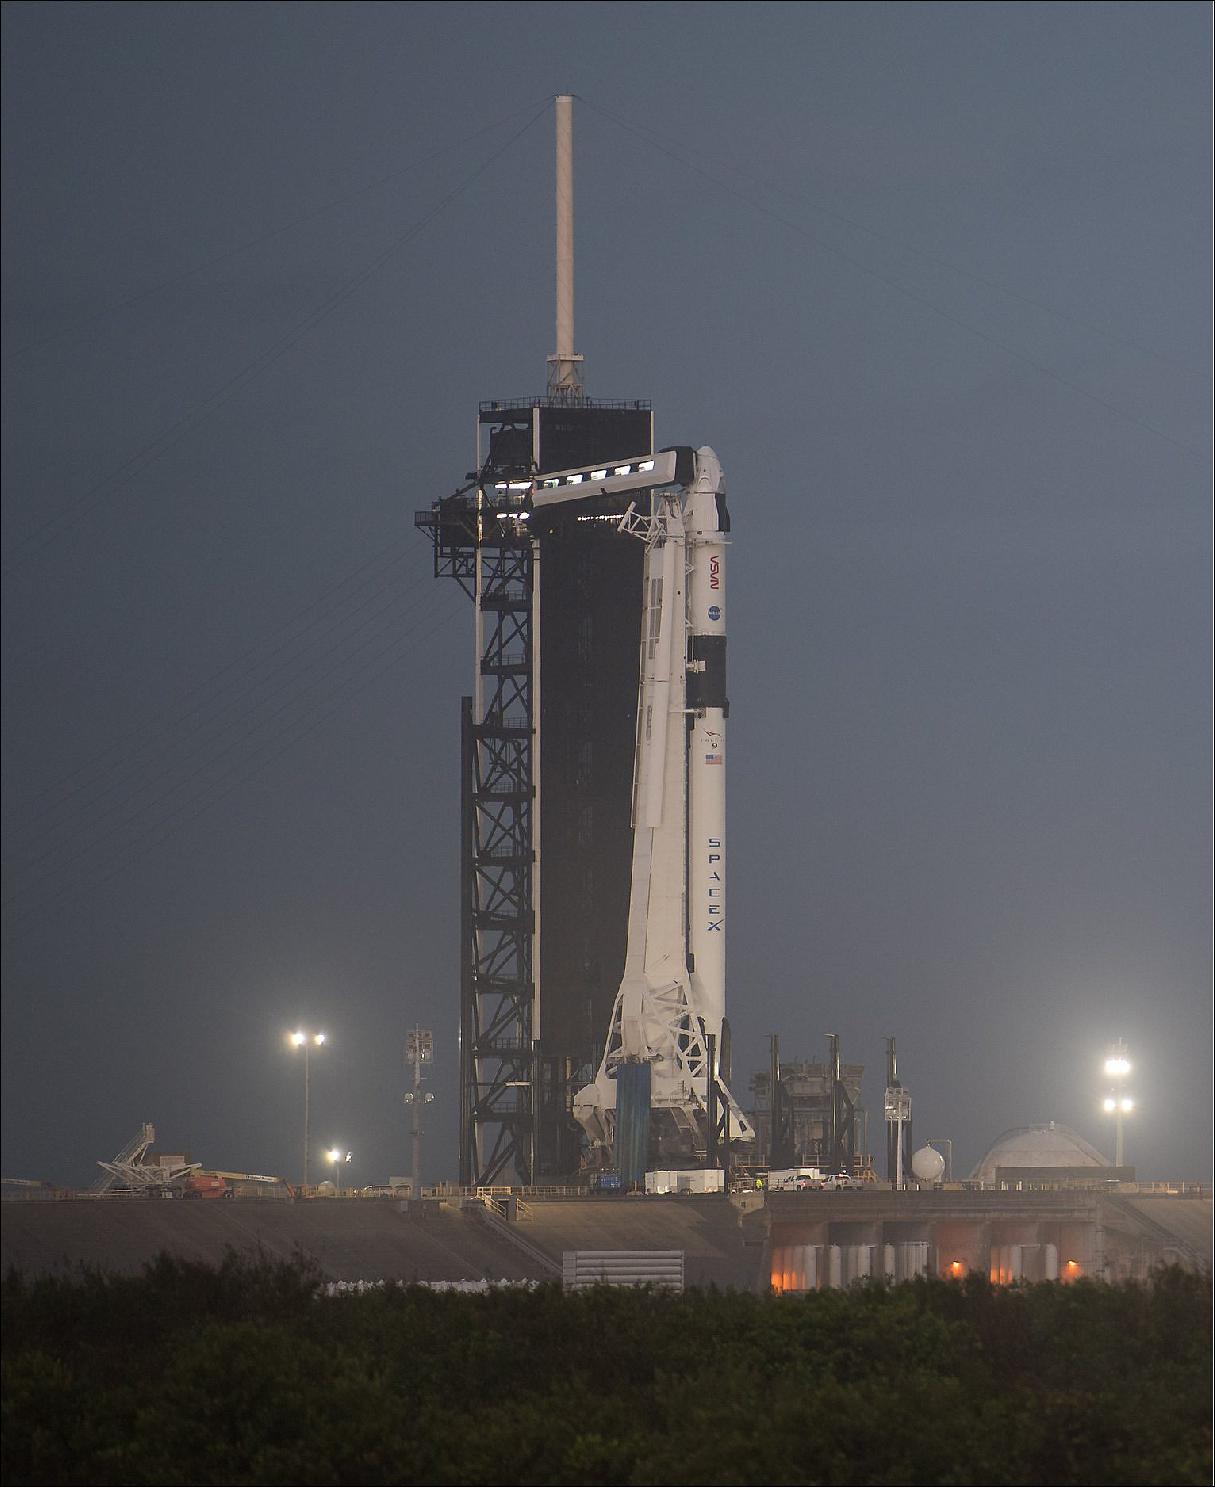 Figure 4: A SpaceX Falcon 9 rocket with the company’s Crew Dragon spacecraft stands tall on the launch pad at NASA Kennedy Space Center’s Launch Complex 39A in Florida on Tuesday, Nov. 10, after being rolled out overnight (image credit: NASA/Joel Kowsky)